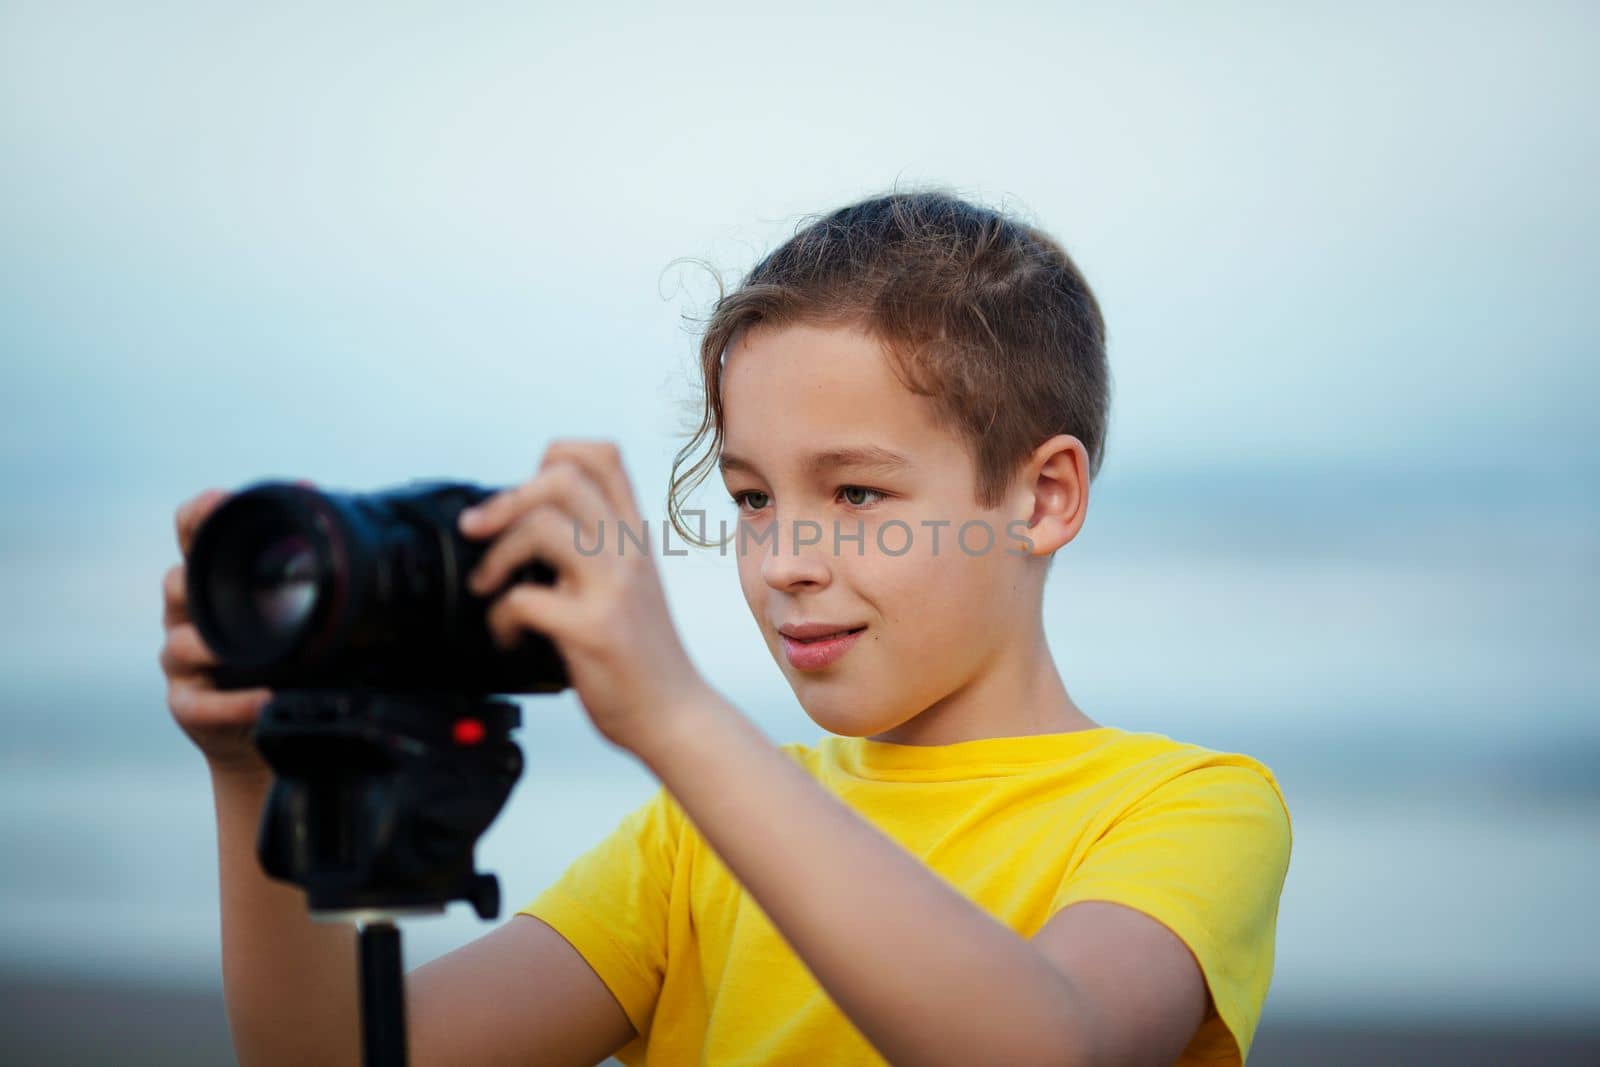 Boy teenager with digital camera on tripod outdoors. Child interested in photography-videography learning to take picture and make videos